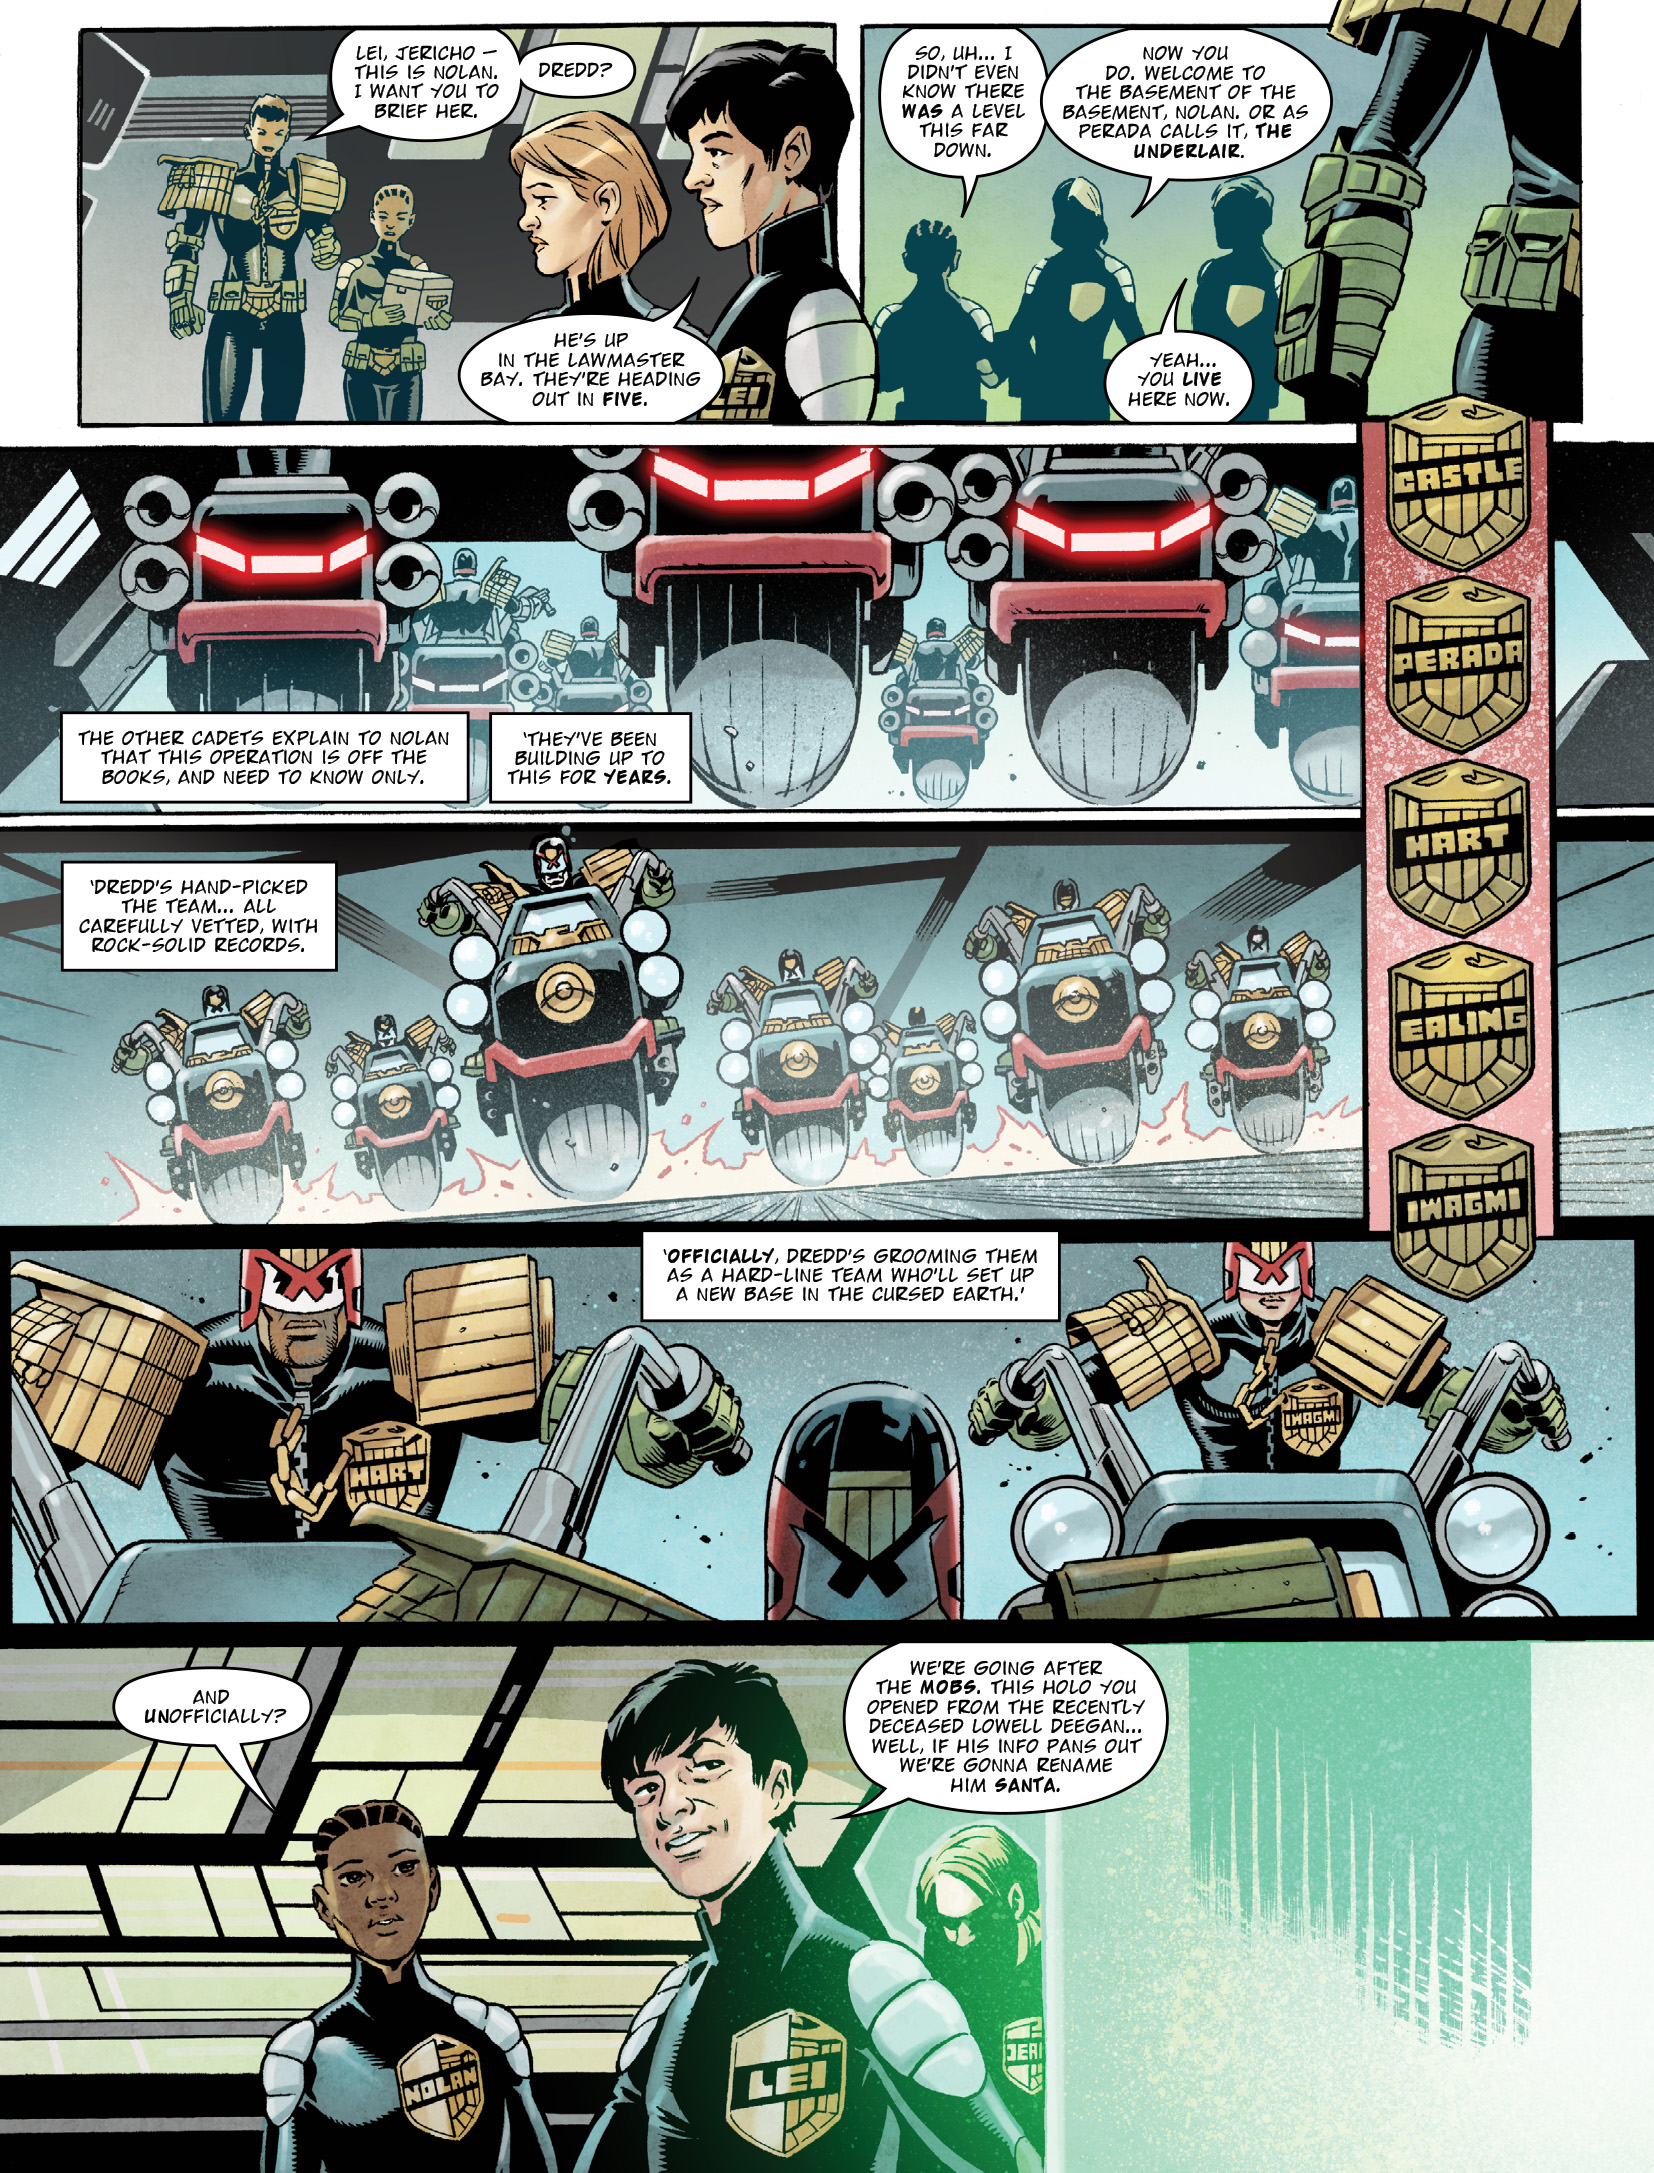 2000 AD: Chapter 2333 - Page 4